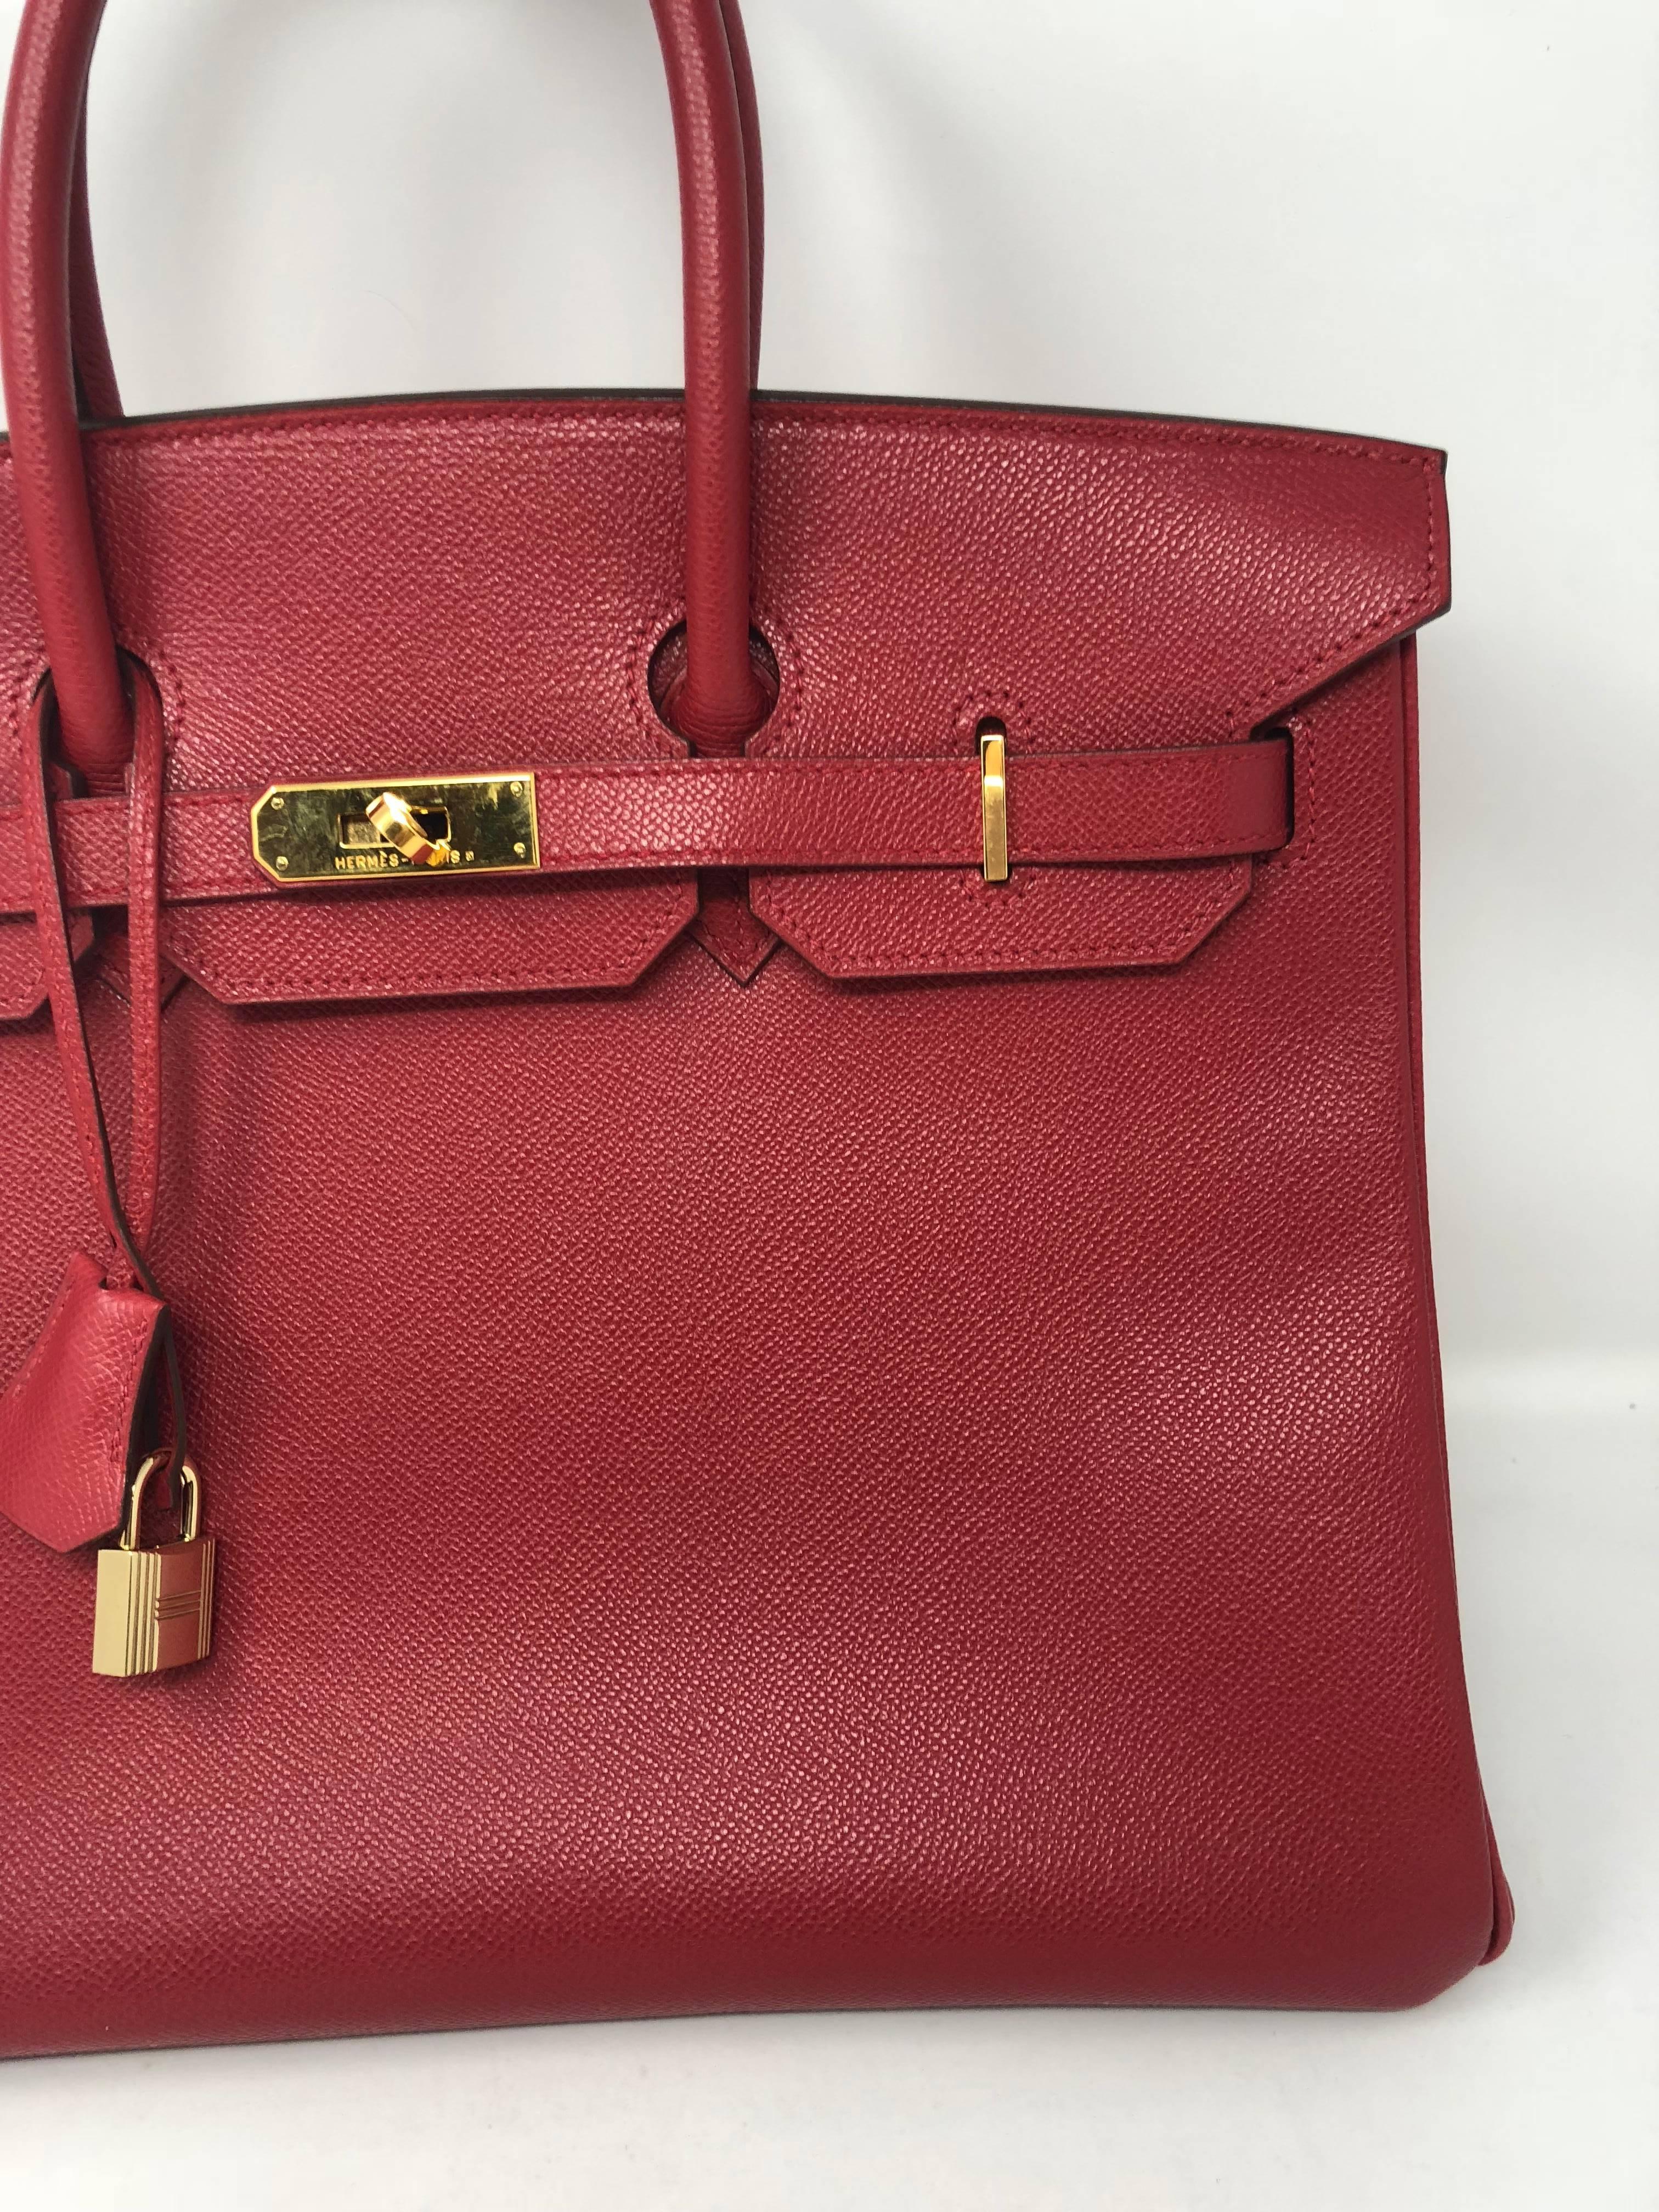 Hermes Red Birkin 35 with gold hardware. Mint condition. Beautiful rich red color. Comes with clochette, keys and dust cover. Guaranteed authentic. 